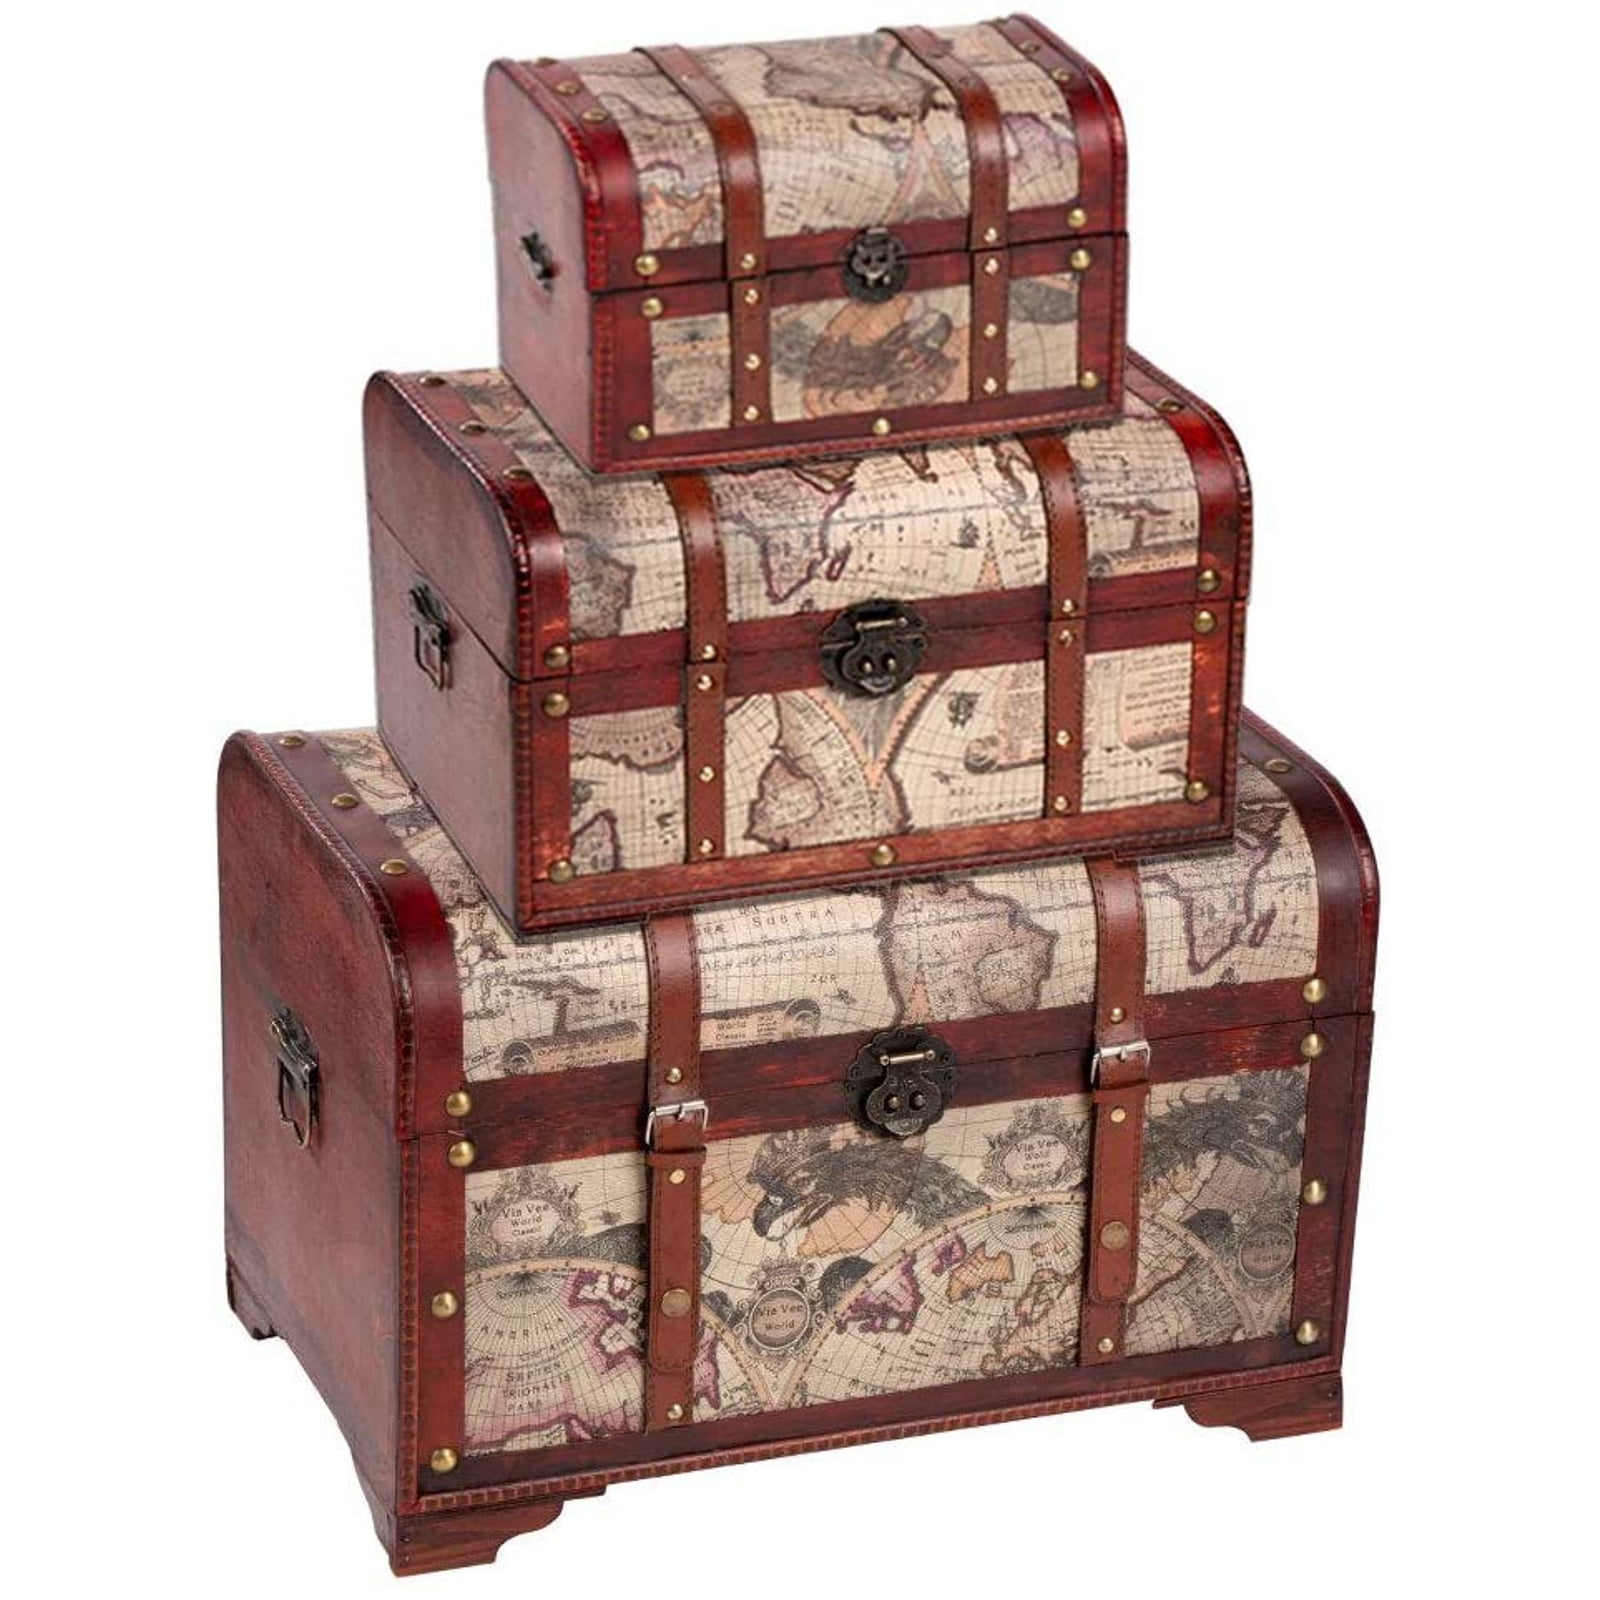 HF 008C-1 Faux Leather Decorative Wooden Storage Trunk 